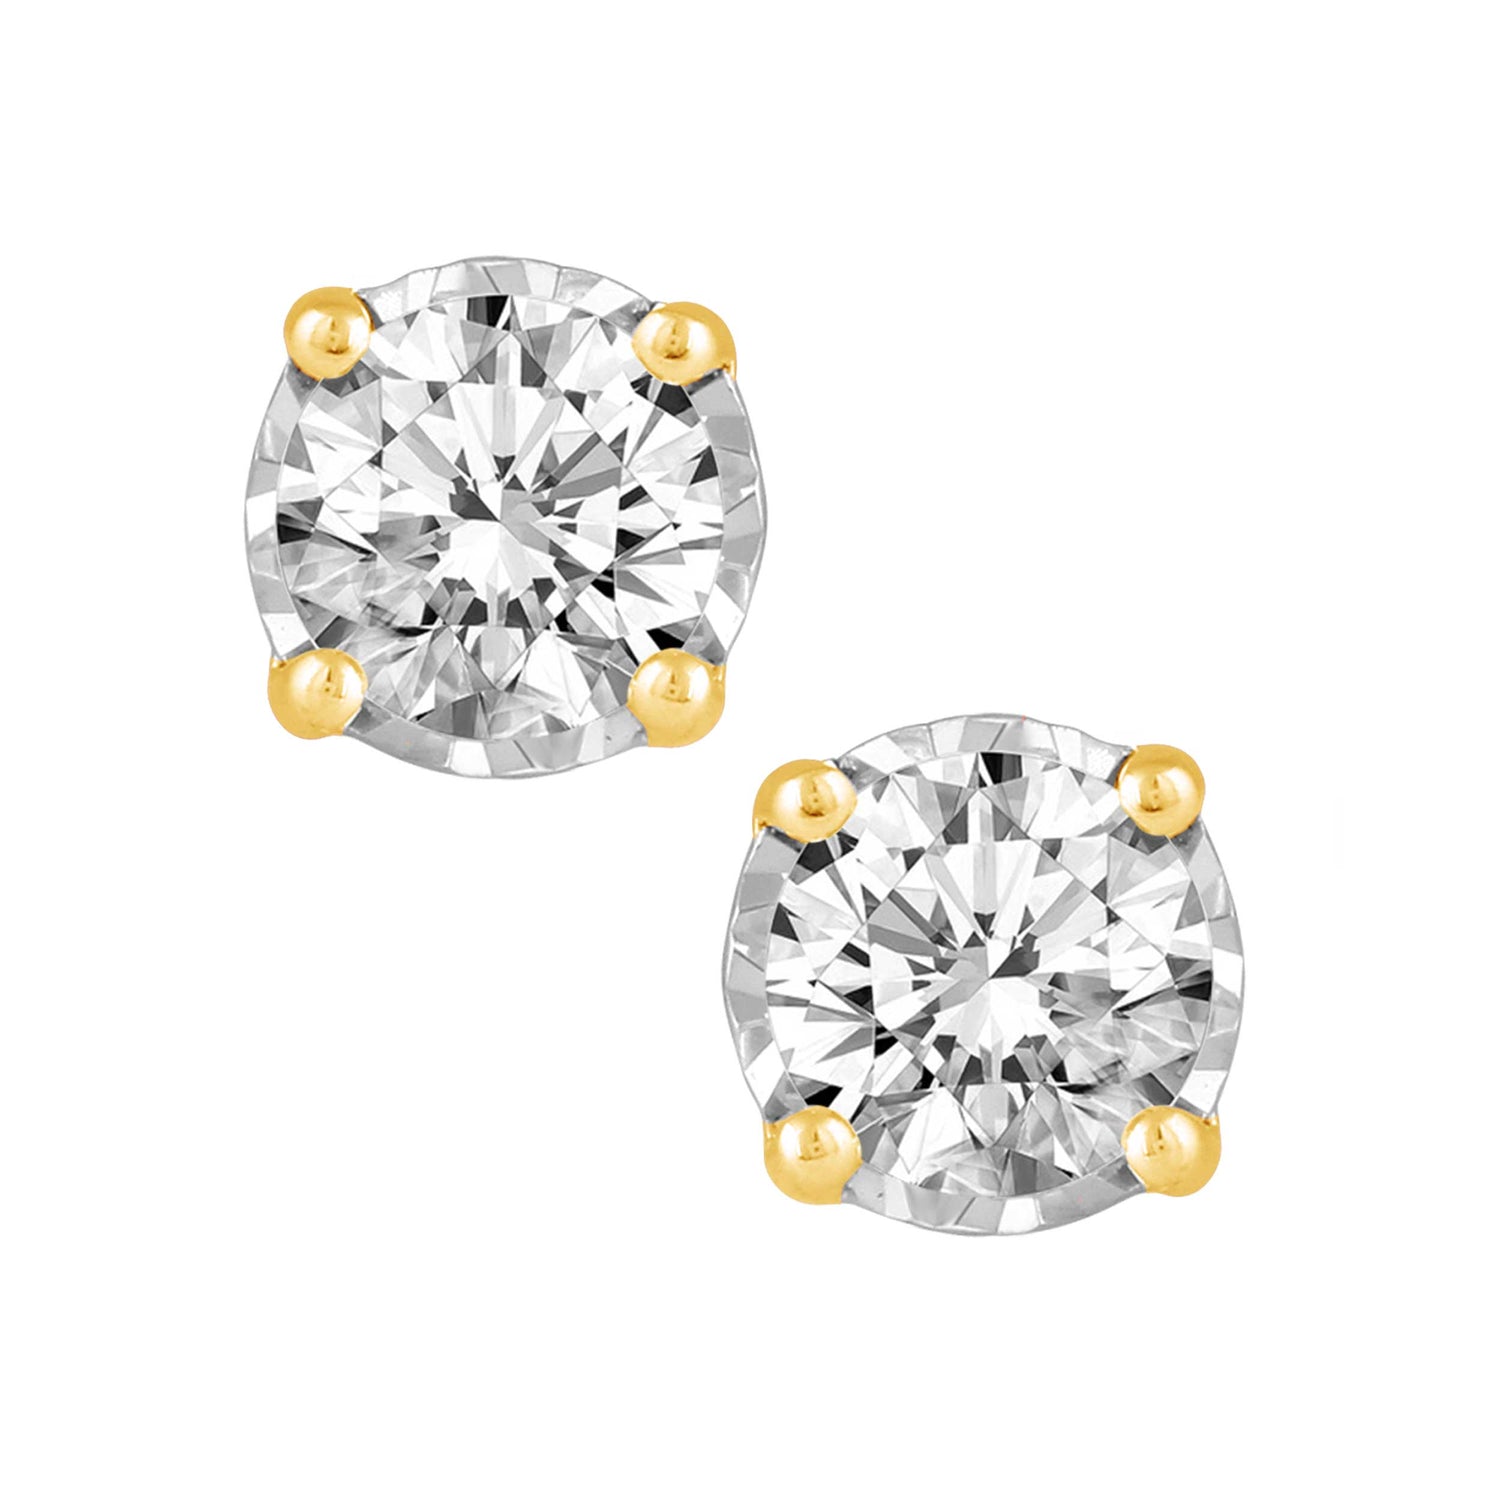 1 1/2ct TW (SI2-I1) Natural Diamond Earrings with side stones in14K White Gold/Yellow Gold